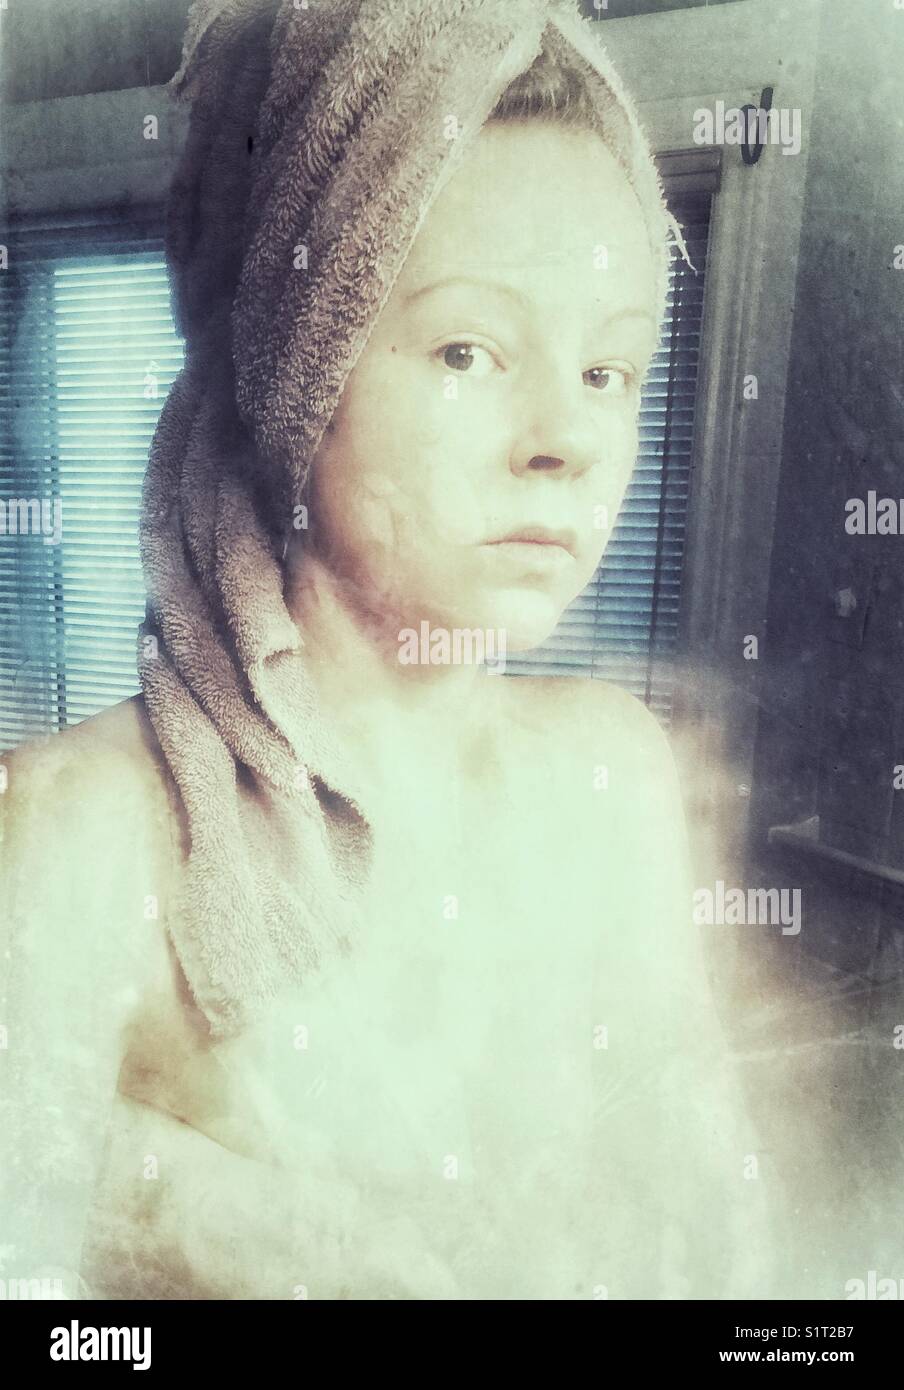 Portrait of a woman with towel on head in a steamy washroom after having a shower Stock Photo